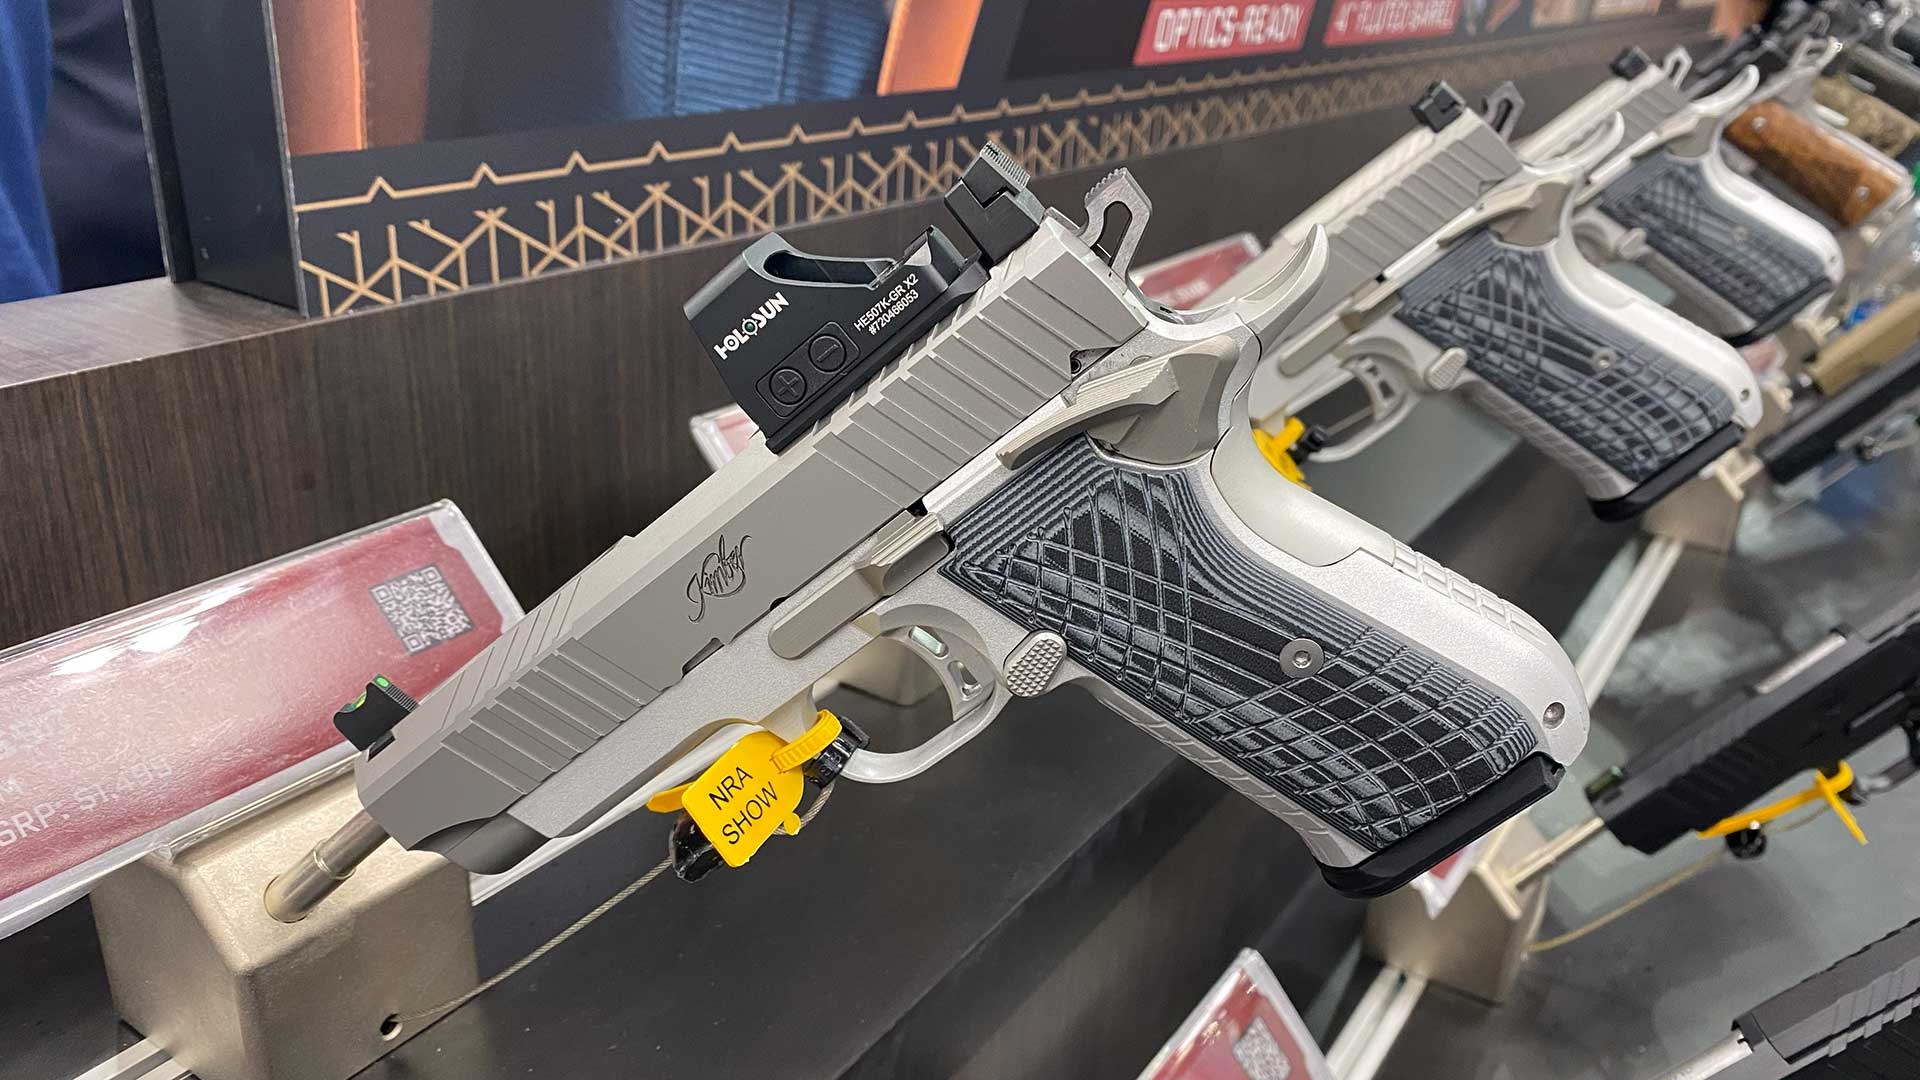 A Kimber KDS9 double-stack silber handgun shown on a display at the 2023 NRA Annual Meeting & Exhibits